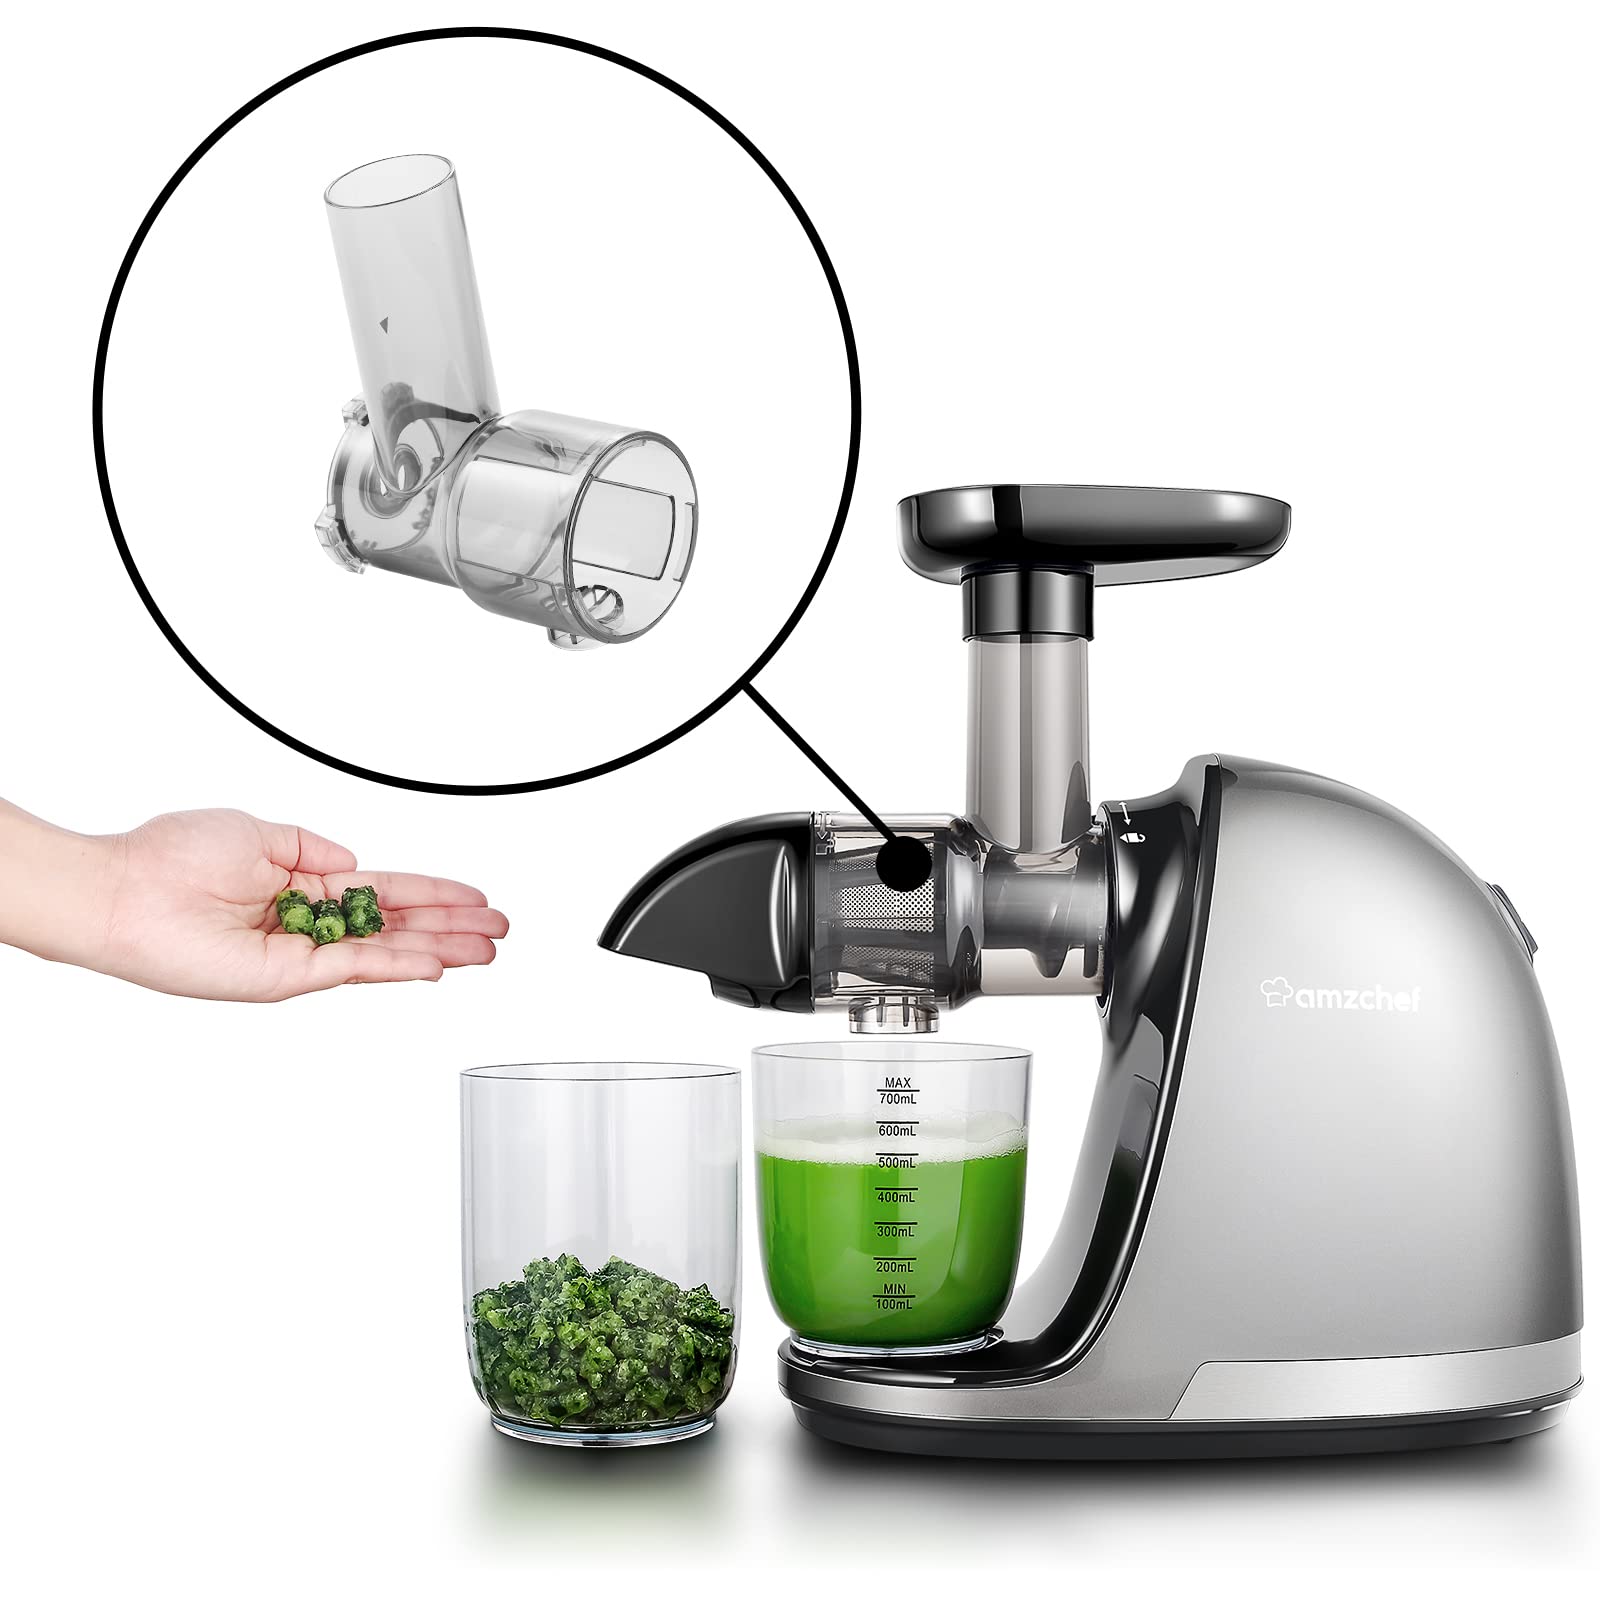 AMZCHEF Masticating Juicer Attachments,Slow Juicer Accessories for AMZCHEF, Compatible with 1501 and 3001,Cold Pressed Juicer Parts,High Juice Yield Great for Fruits and Vegetables